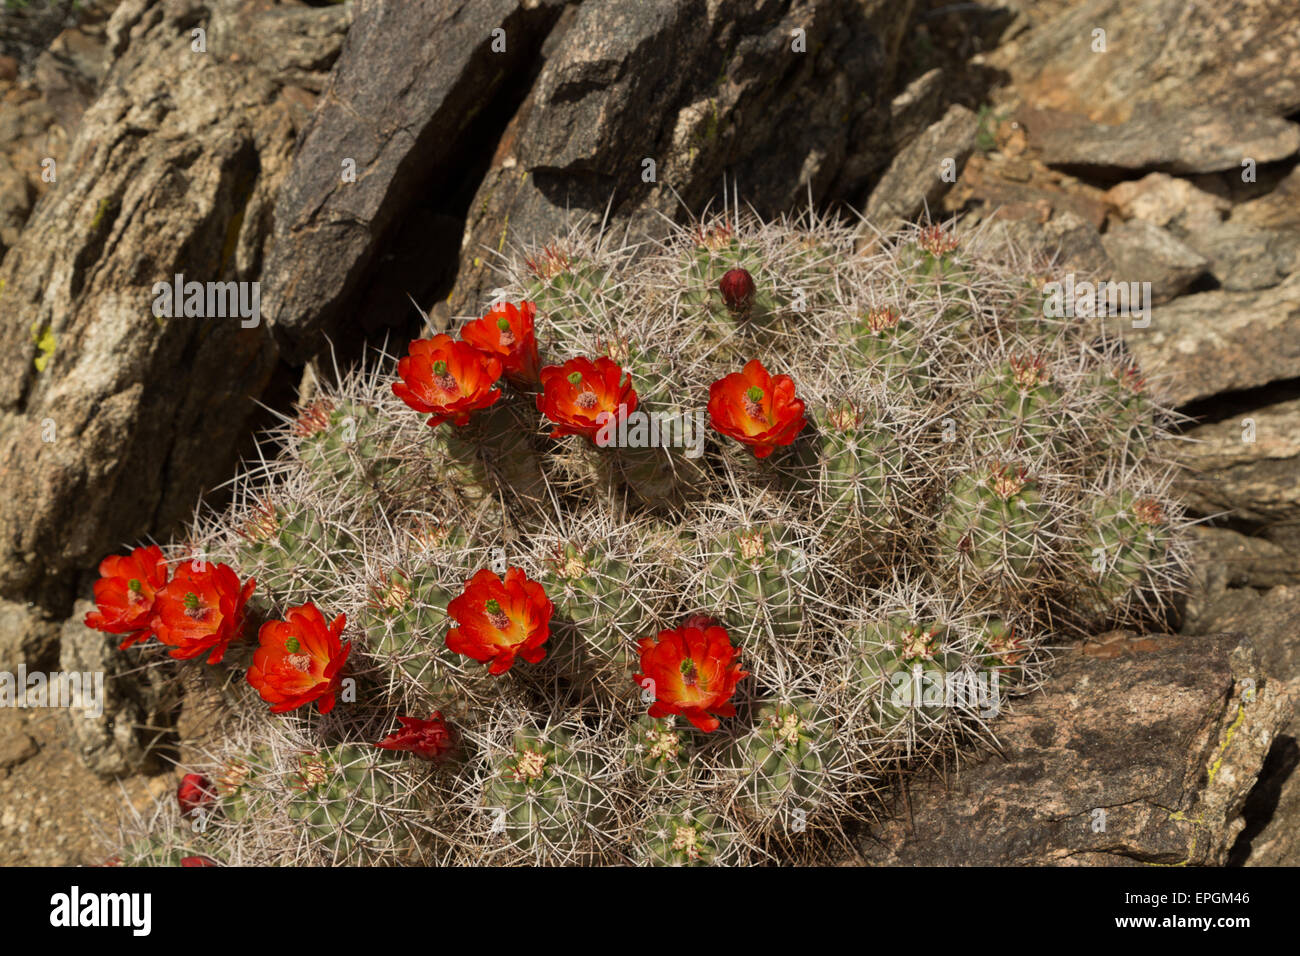 A photograph of a cactus in bloom with red flowers in the Joshua Tree National Park, in California, USA. Stock Photo